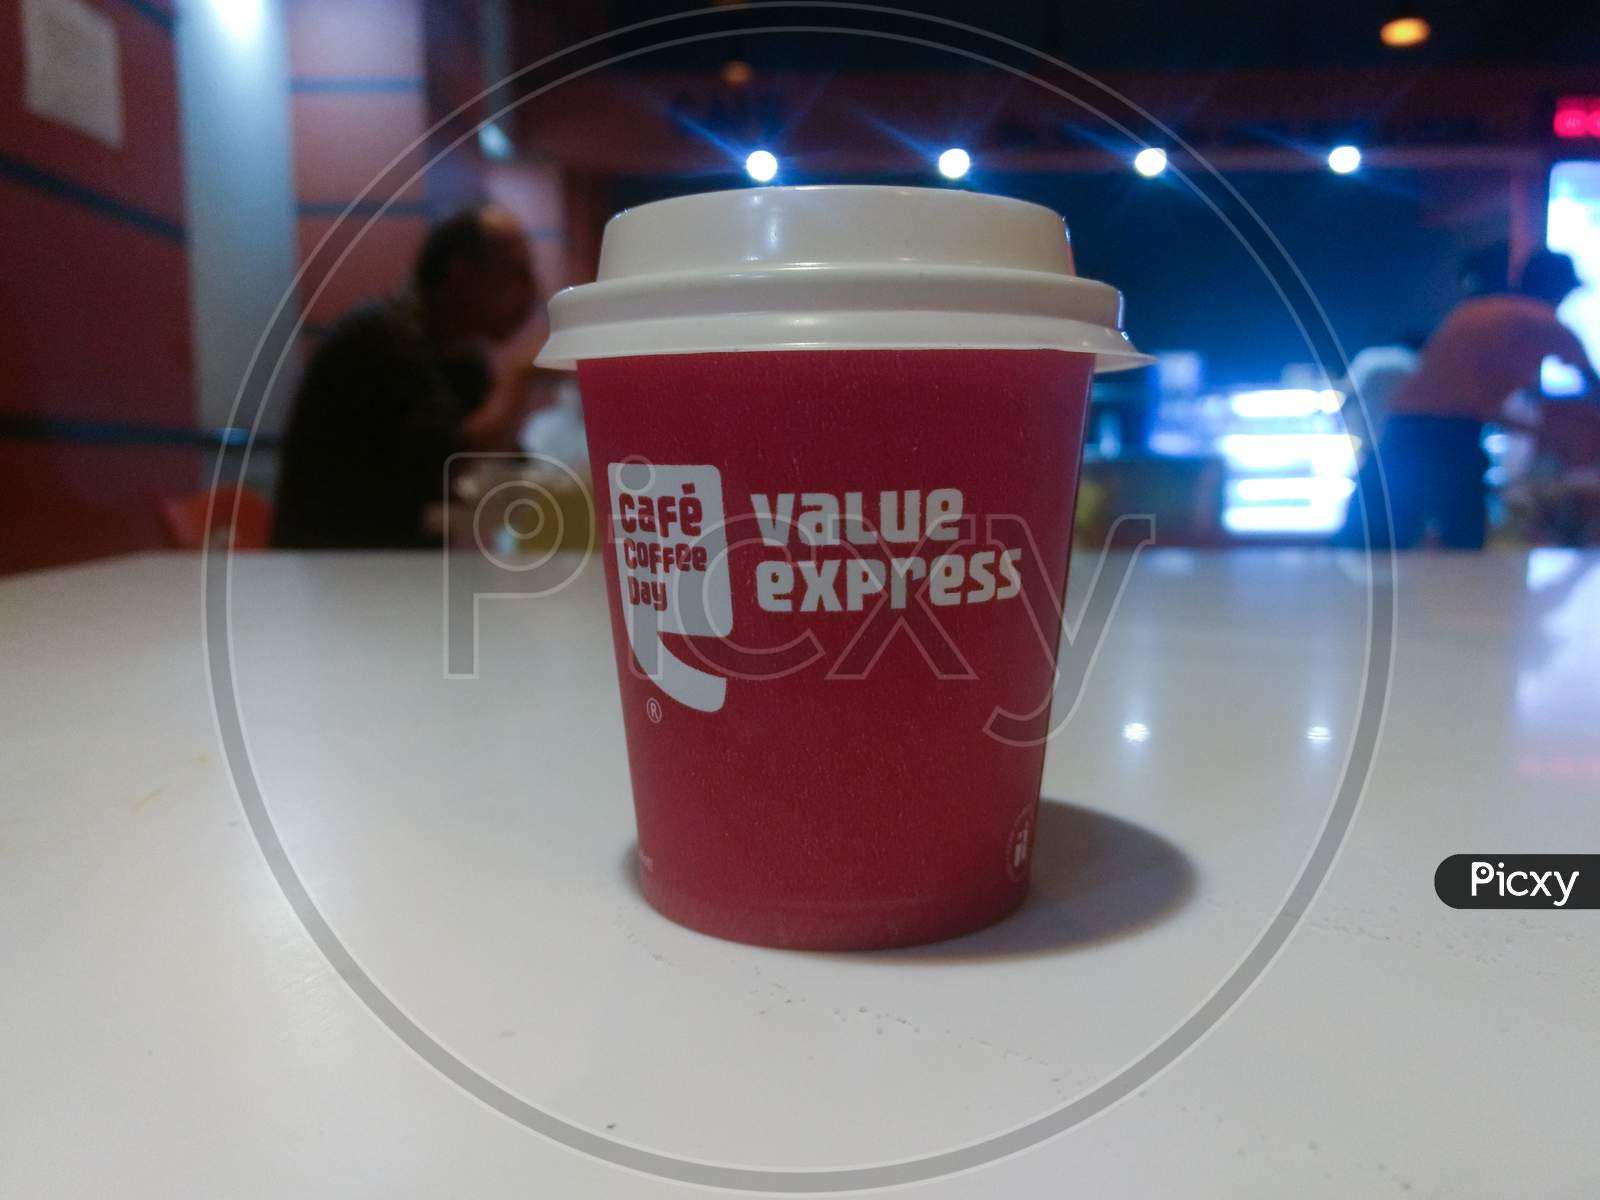 New Delhi, India - March 25, 2019 : Cafe Coffee Day Coffee